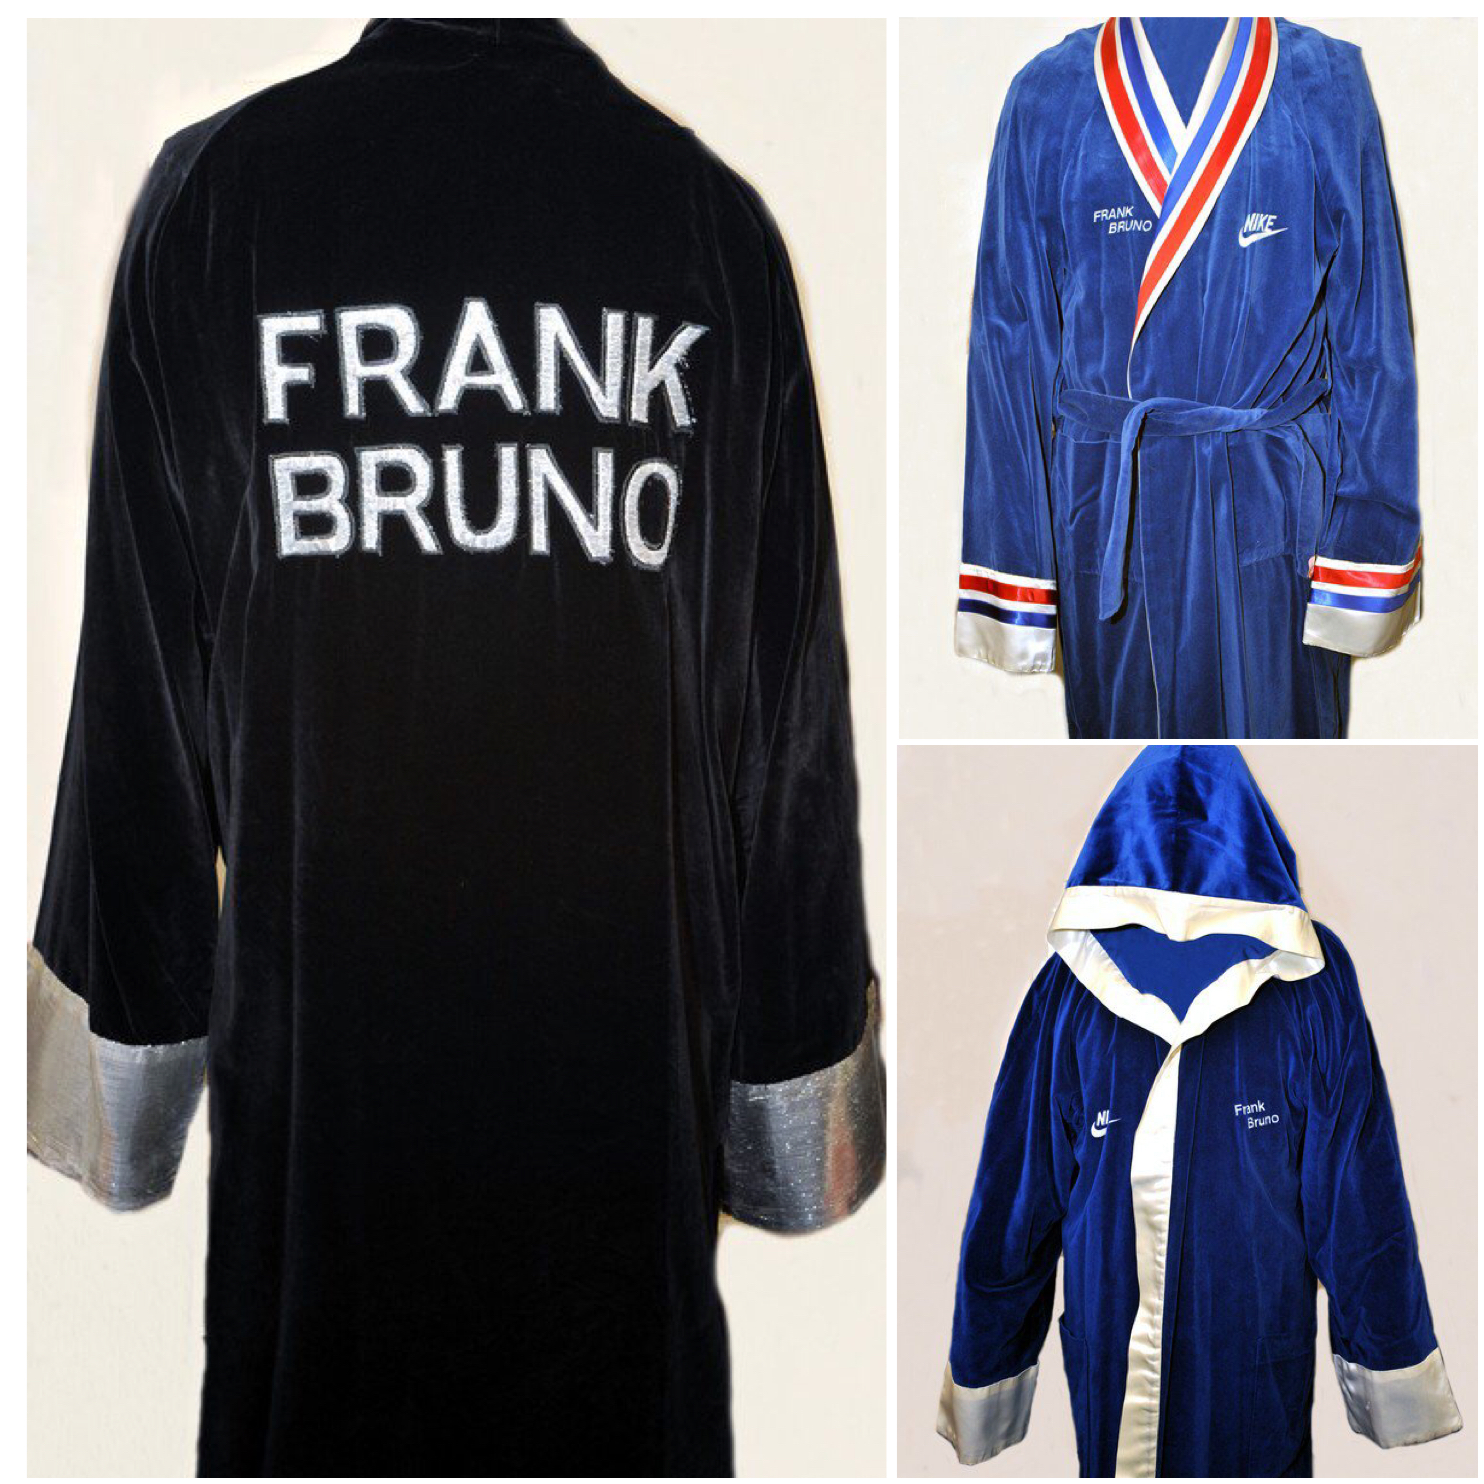 Frank Bruno Robes direct from his agent